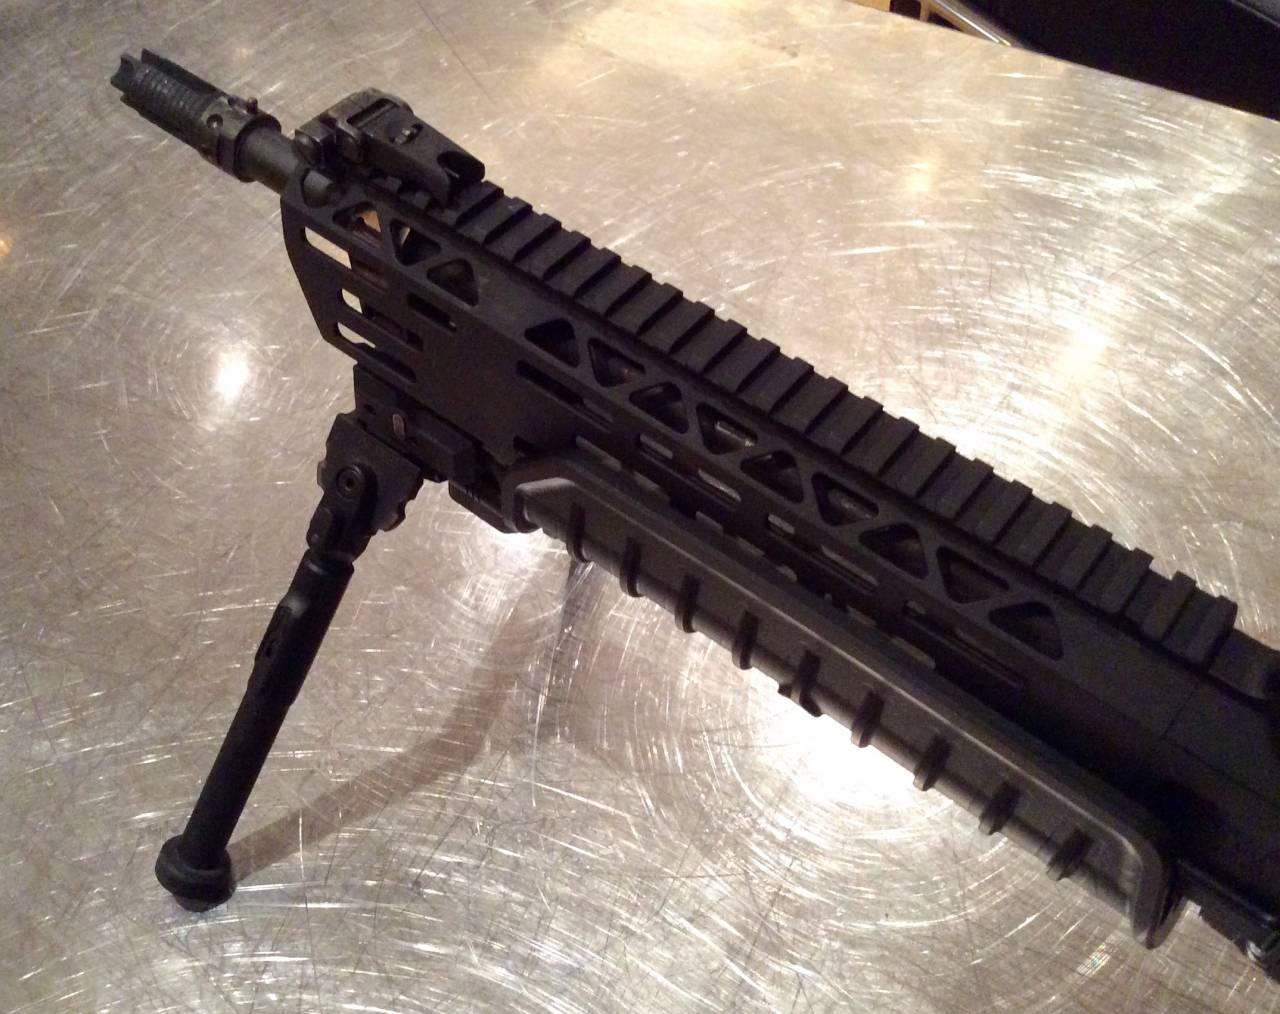 The Ares Stoner 96 bullpup project is completed! Really proud of